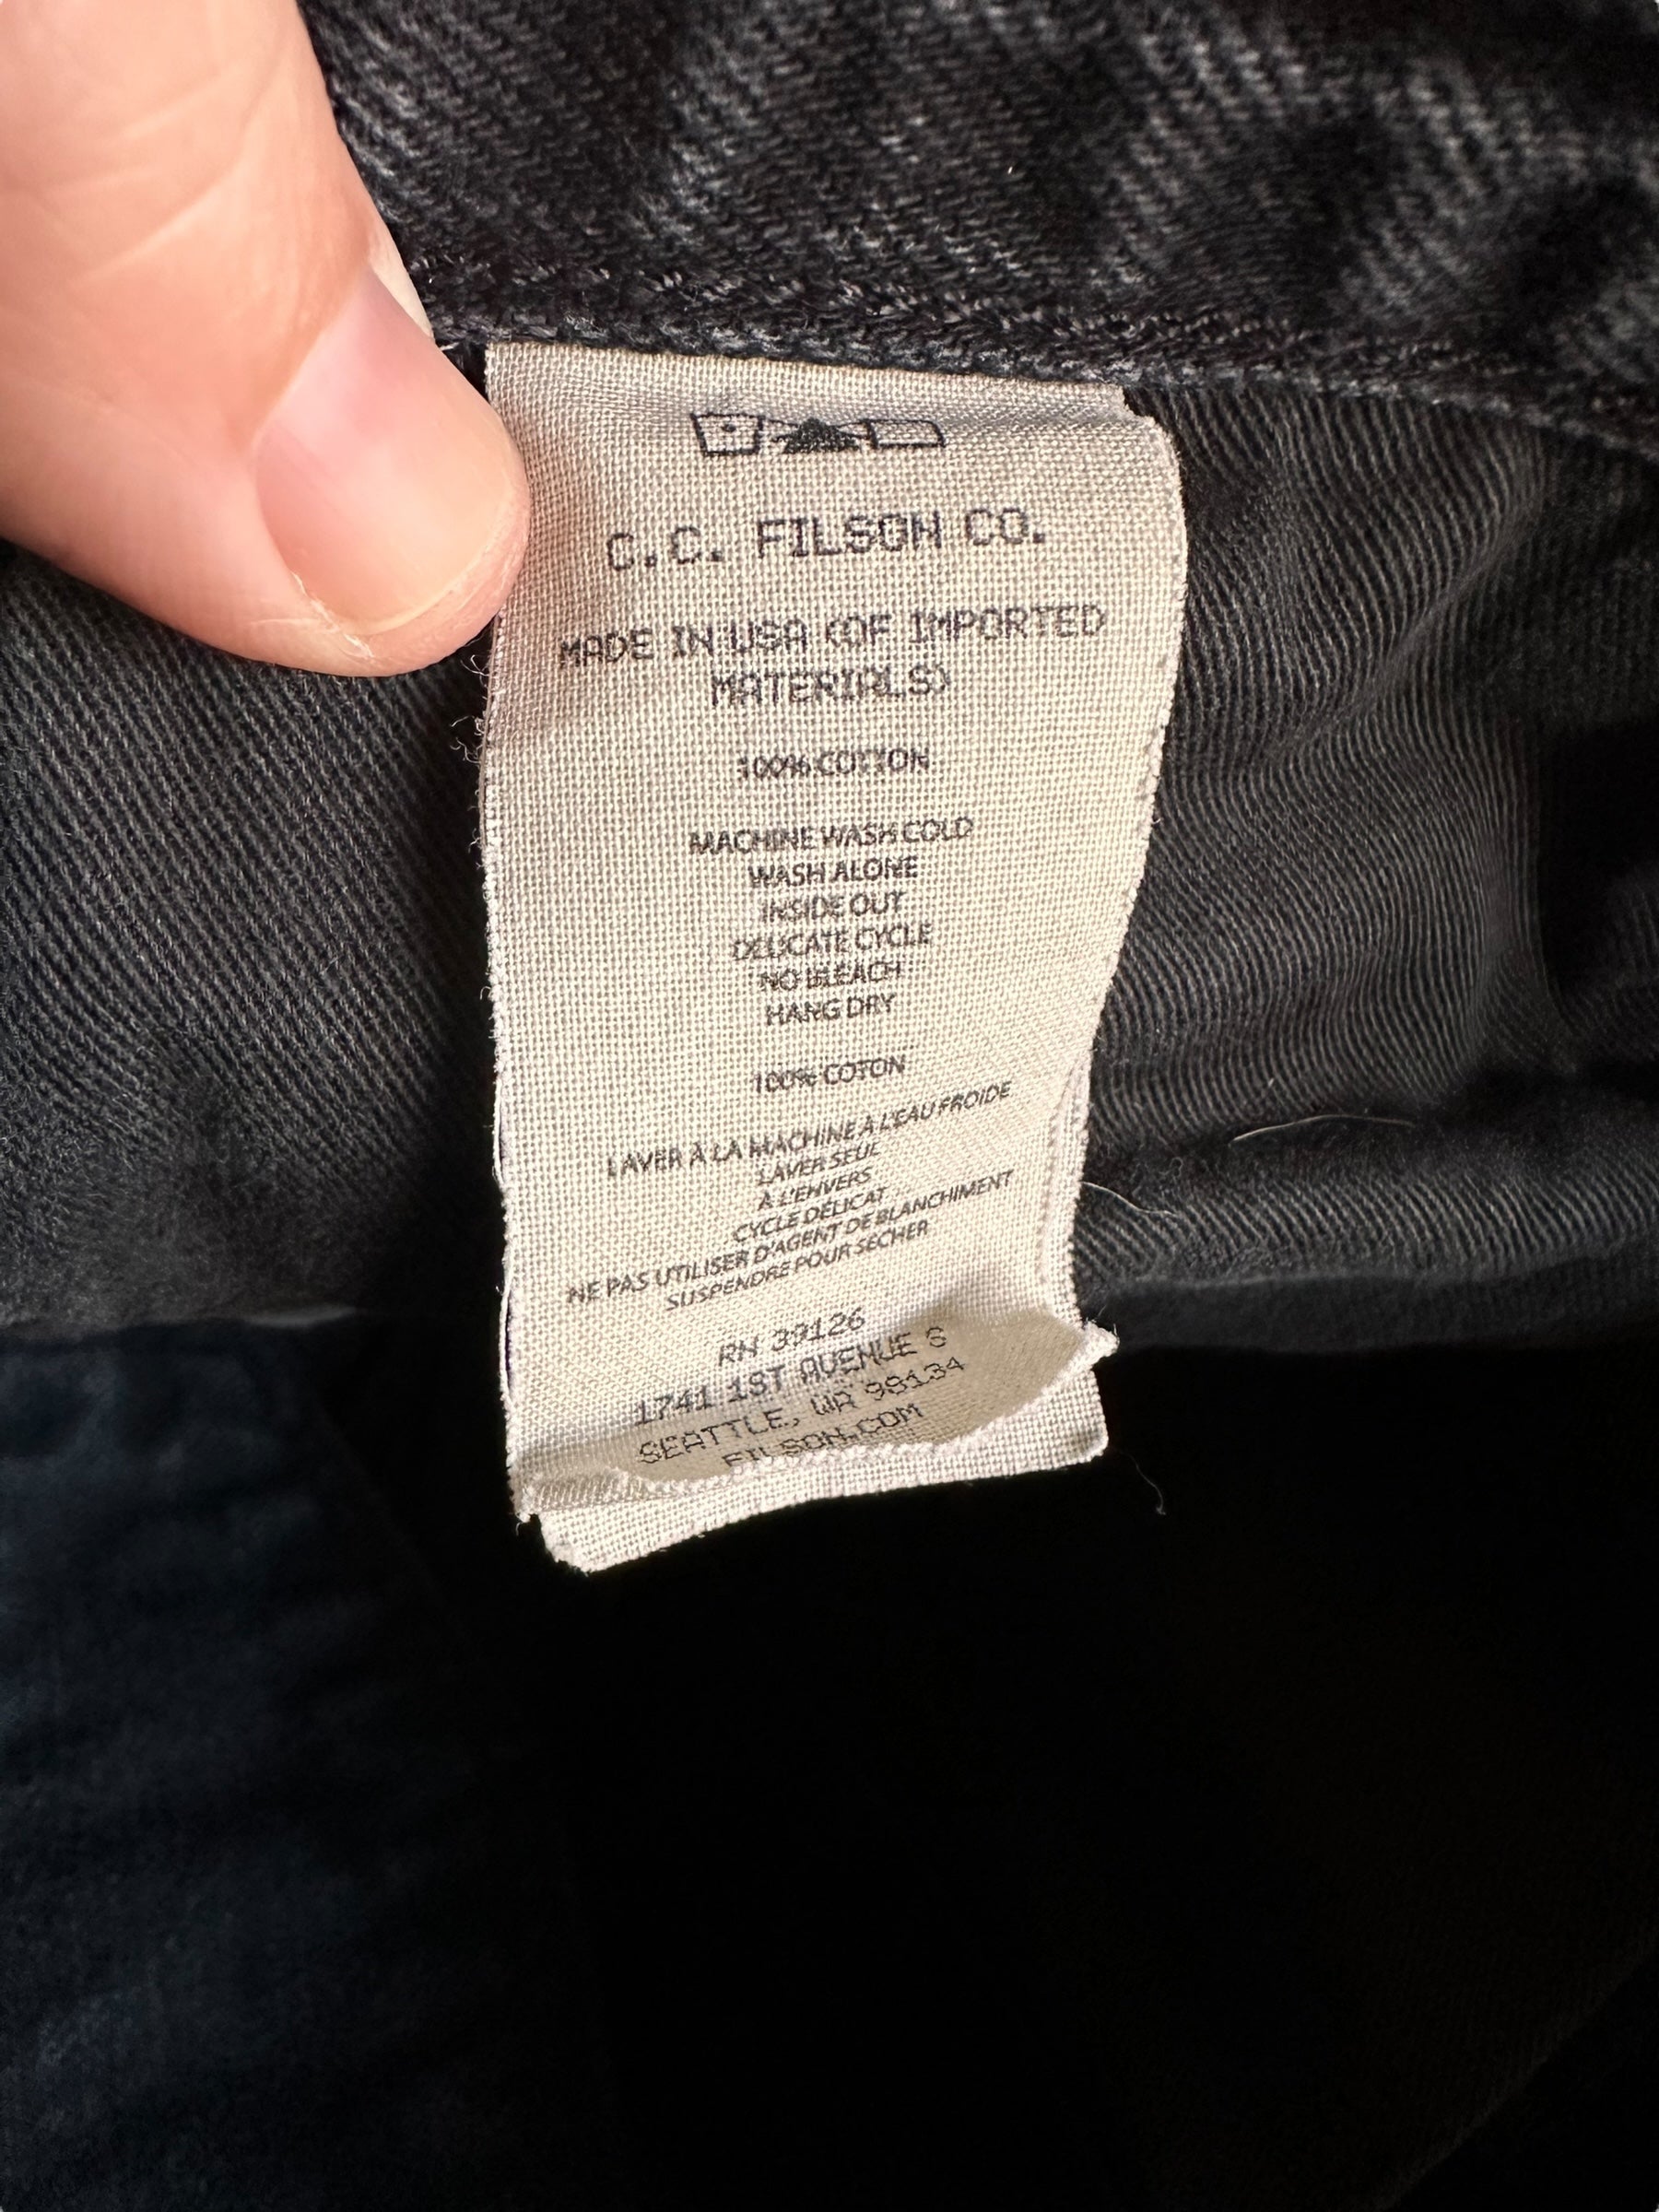 Production Tag on Black Filson Jeans W31 |  Filson Dungarees | Filson Workwear Seattle